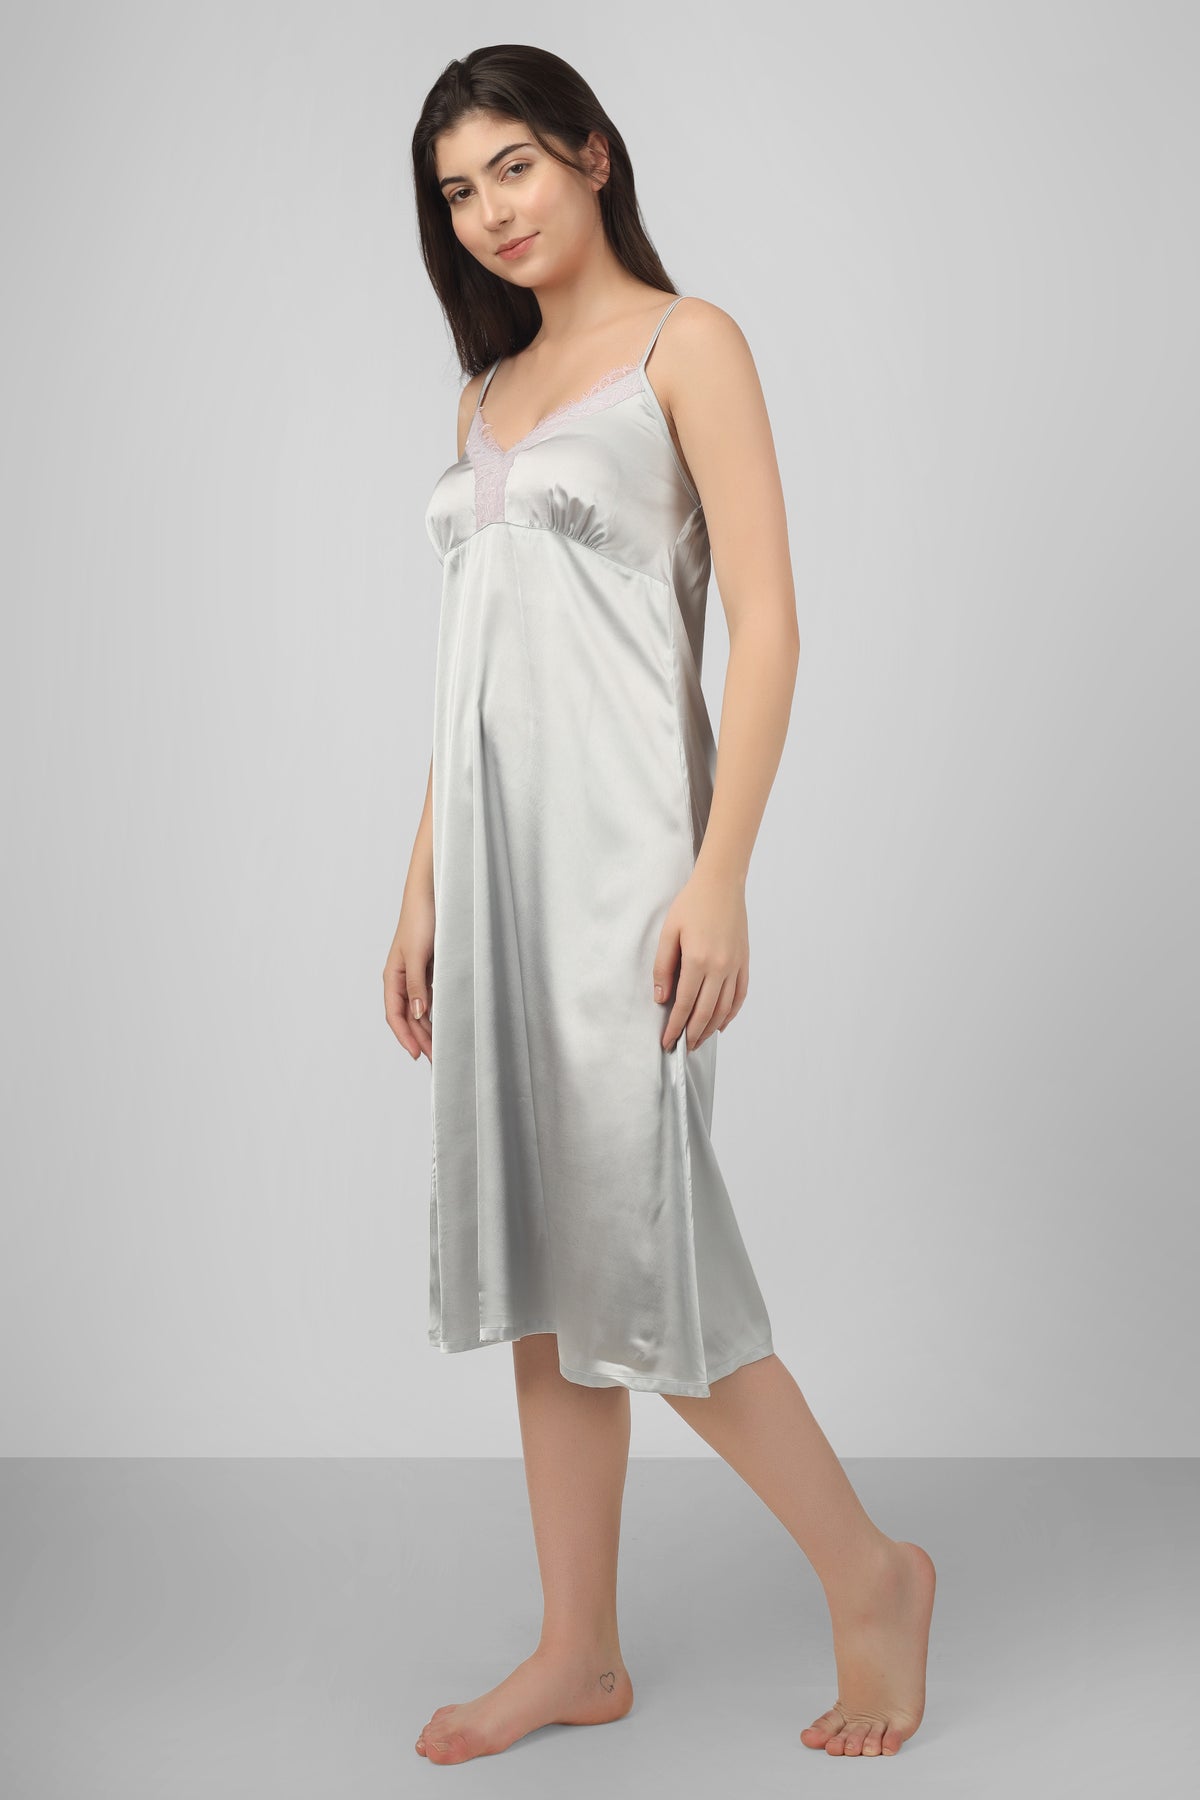 Ace, Nightdress & Gown